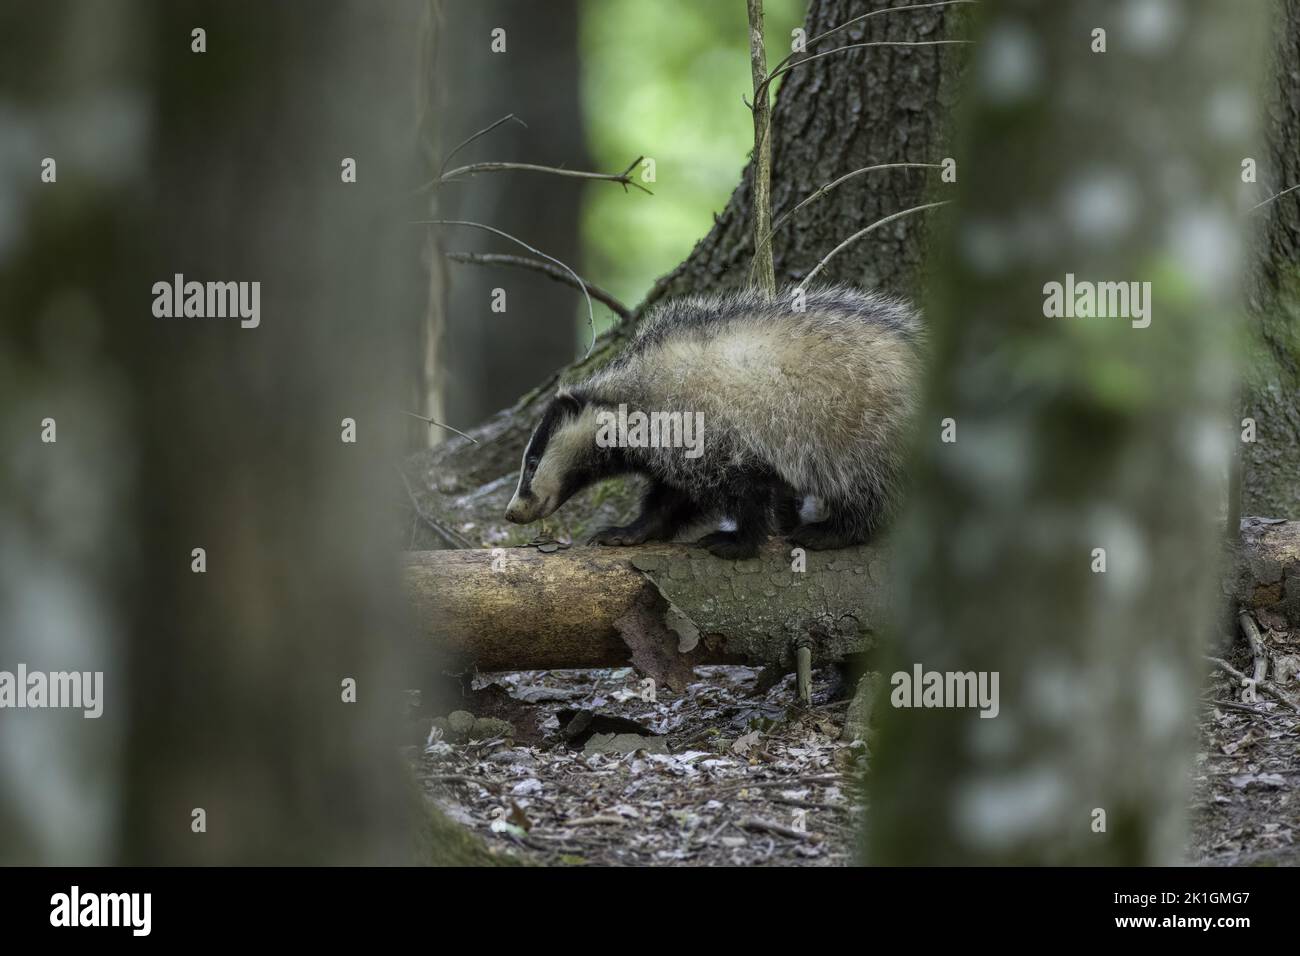 Badger(Meles meles) next to stump in spring, Bialowieza Forest, Poland, Europe Stock Photo